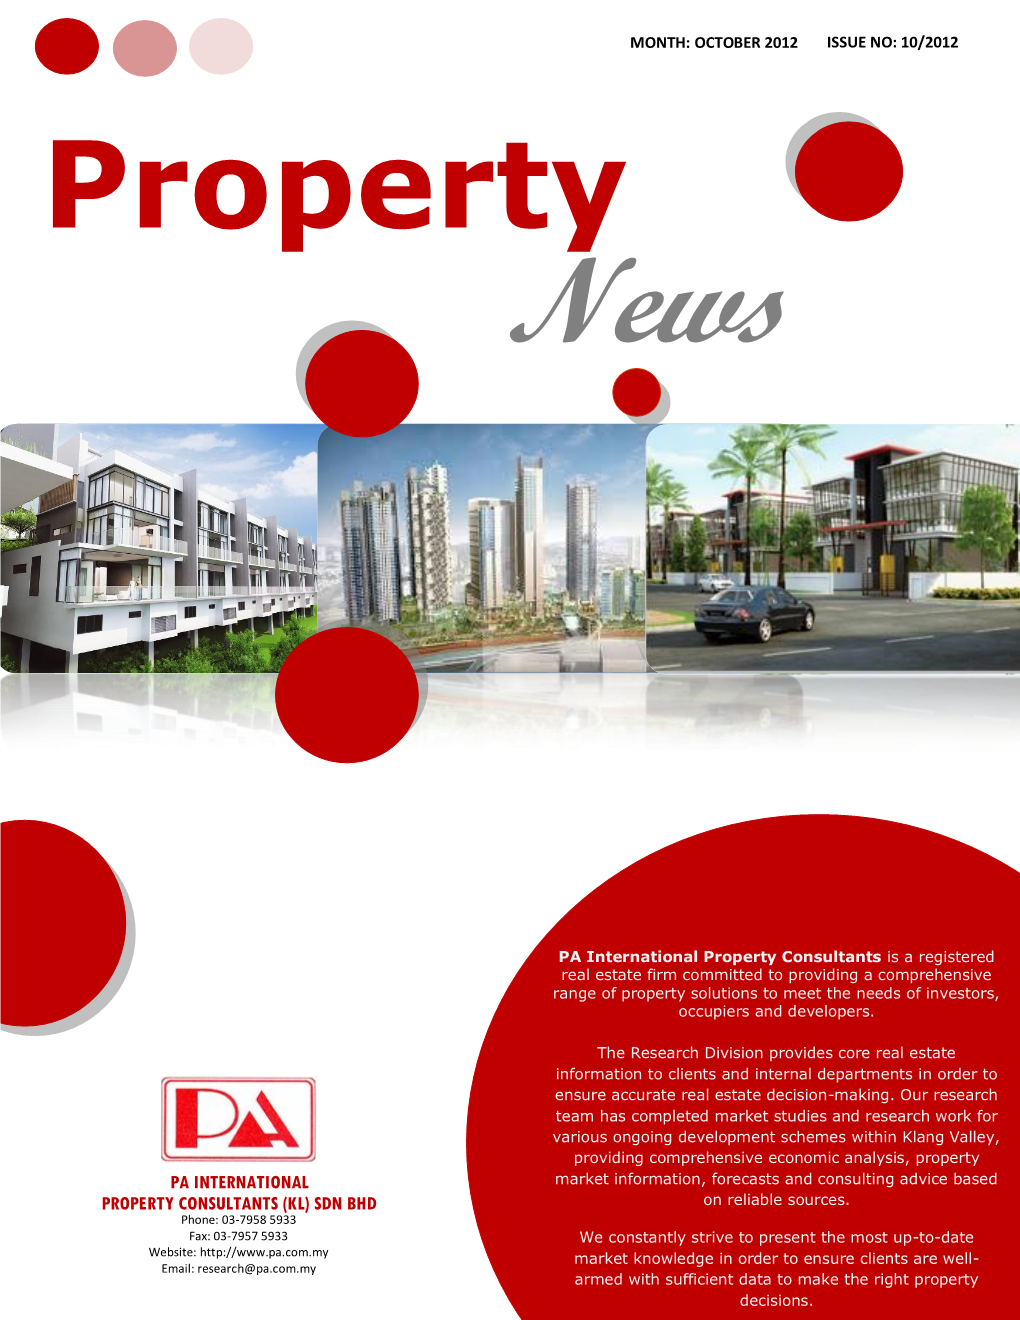 Pa International Property Consultants (Kl) Sdn